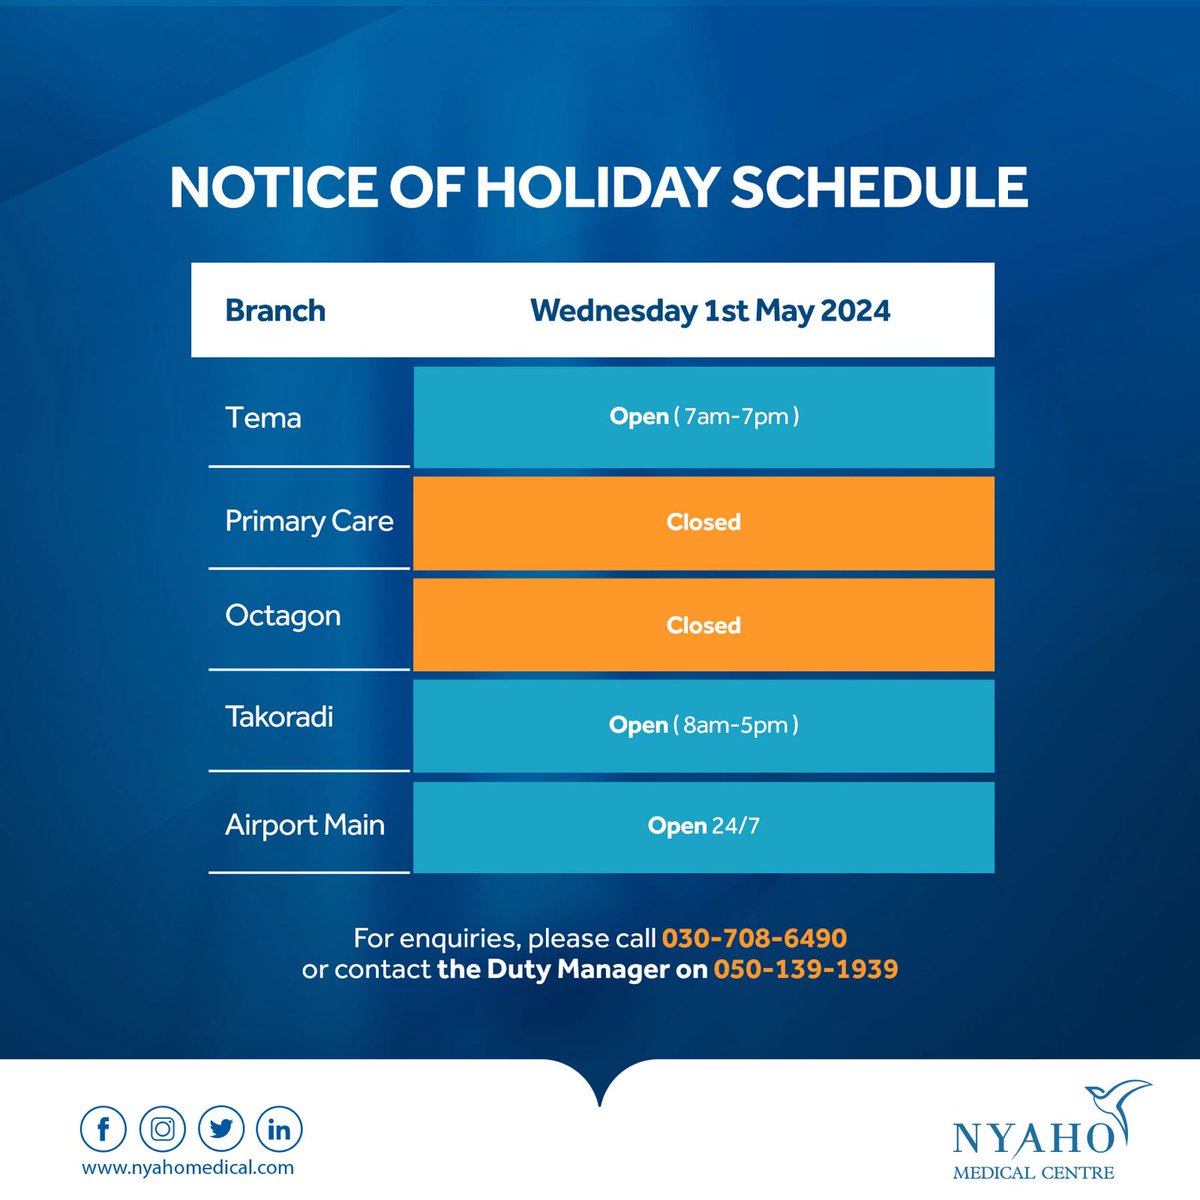 Kindly take note ❕ ❕ #holiday #schedule #health #MayDay #nyaho